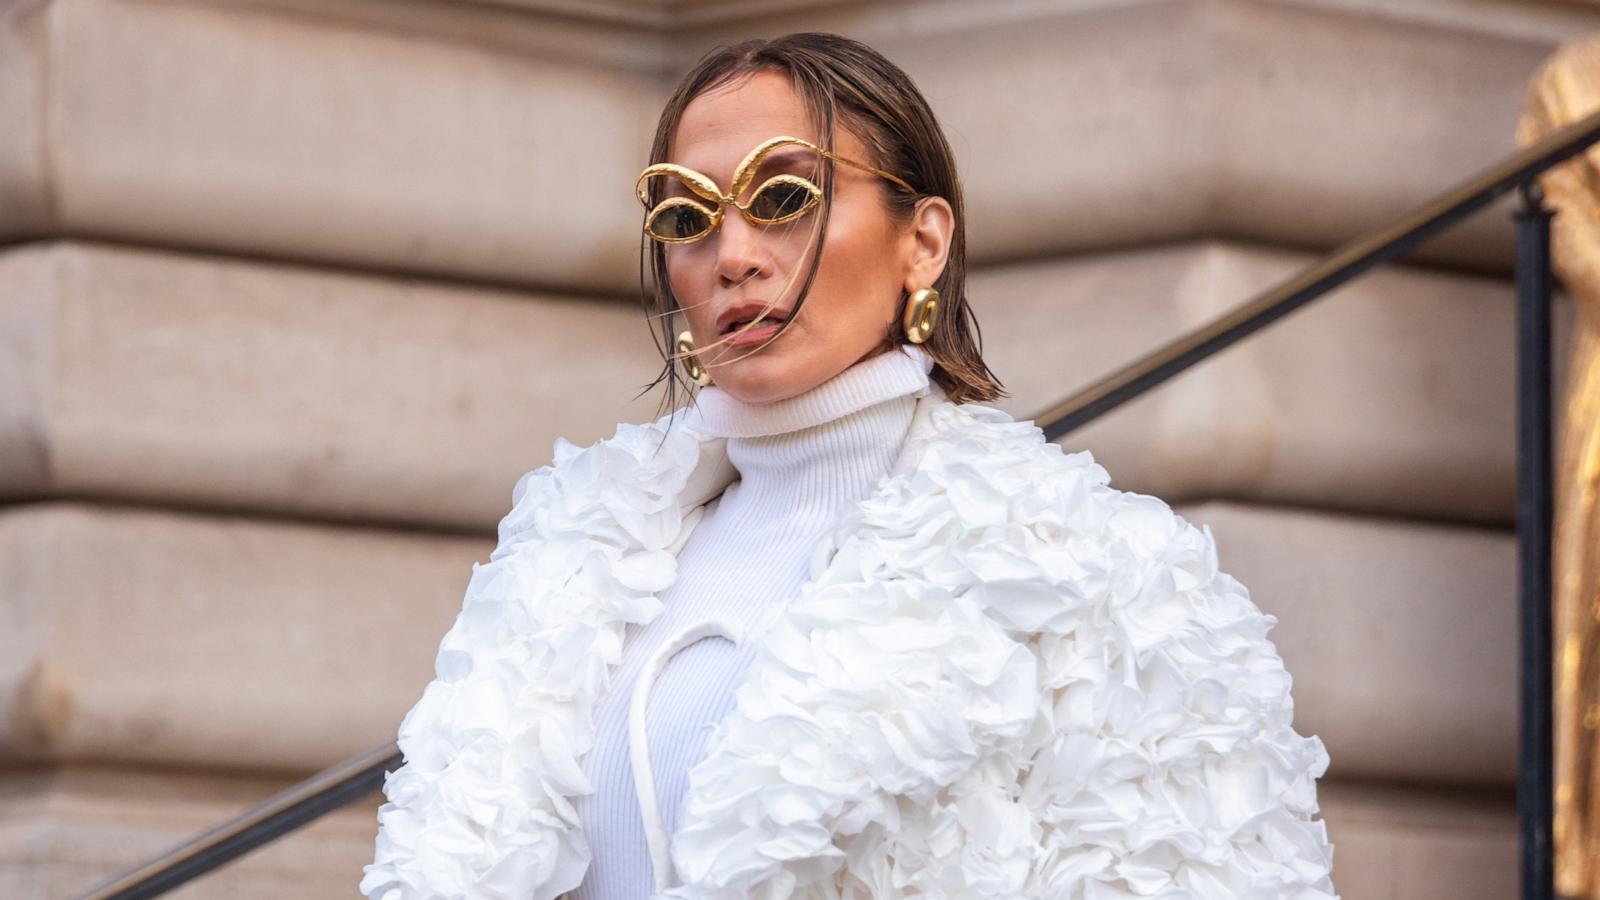 Jennifer Lopez's Exact Workout Leggings Are On Sale Right Now